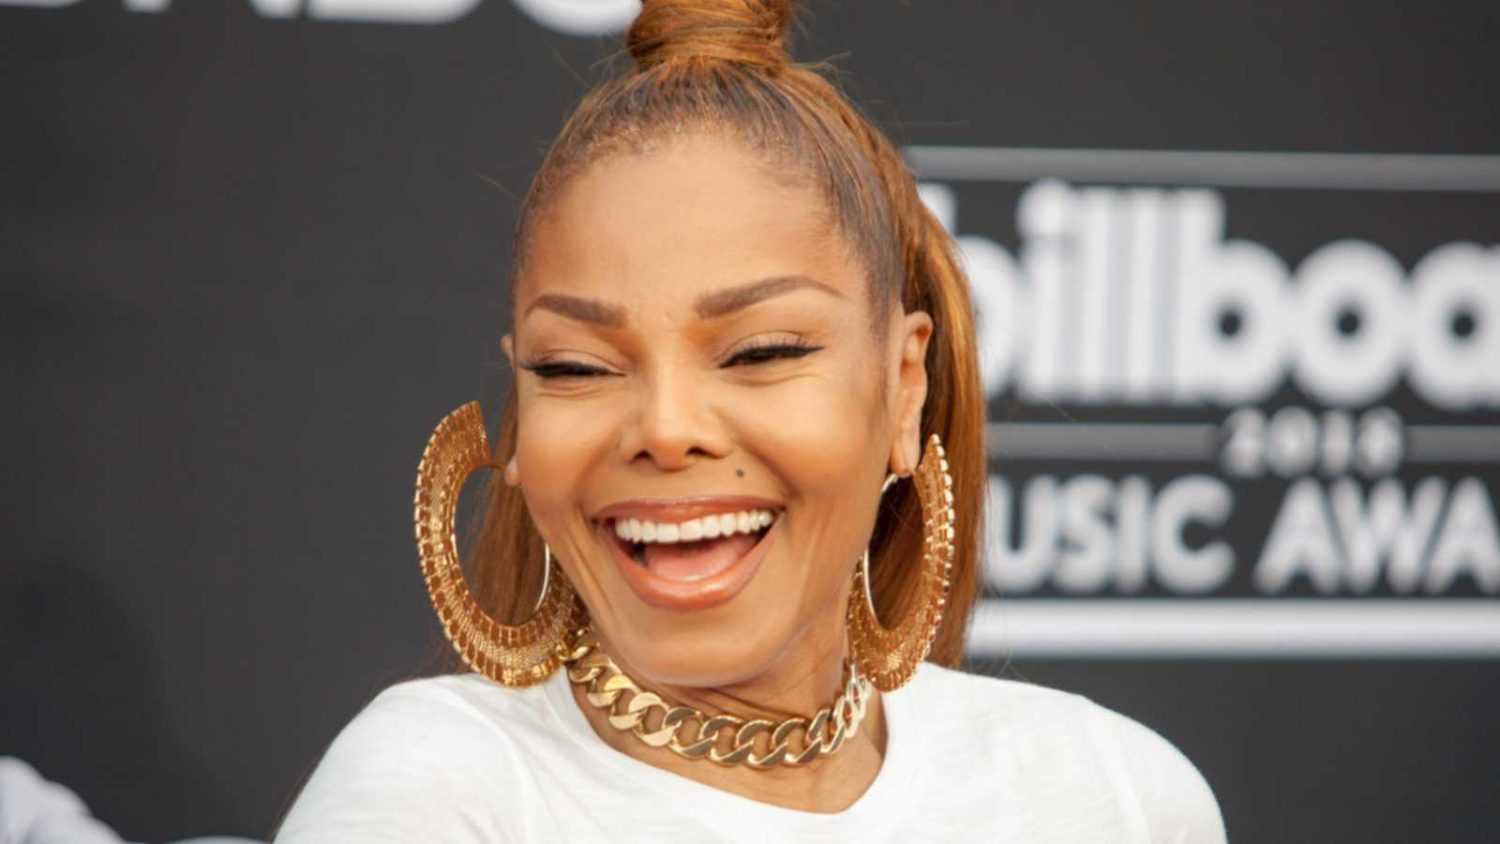 Honoree Janet Jackson attends the Red Carpet at the 2018 Billboards Music Awards at the MGM Grand Arena in Las Vegas, Nevada USA on May 20th 2018